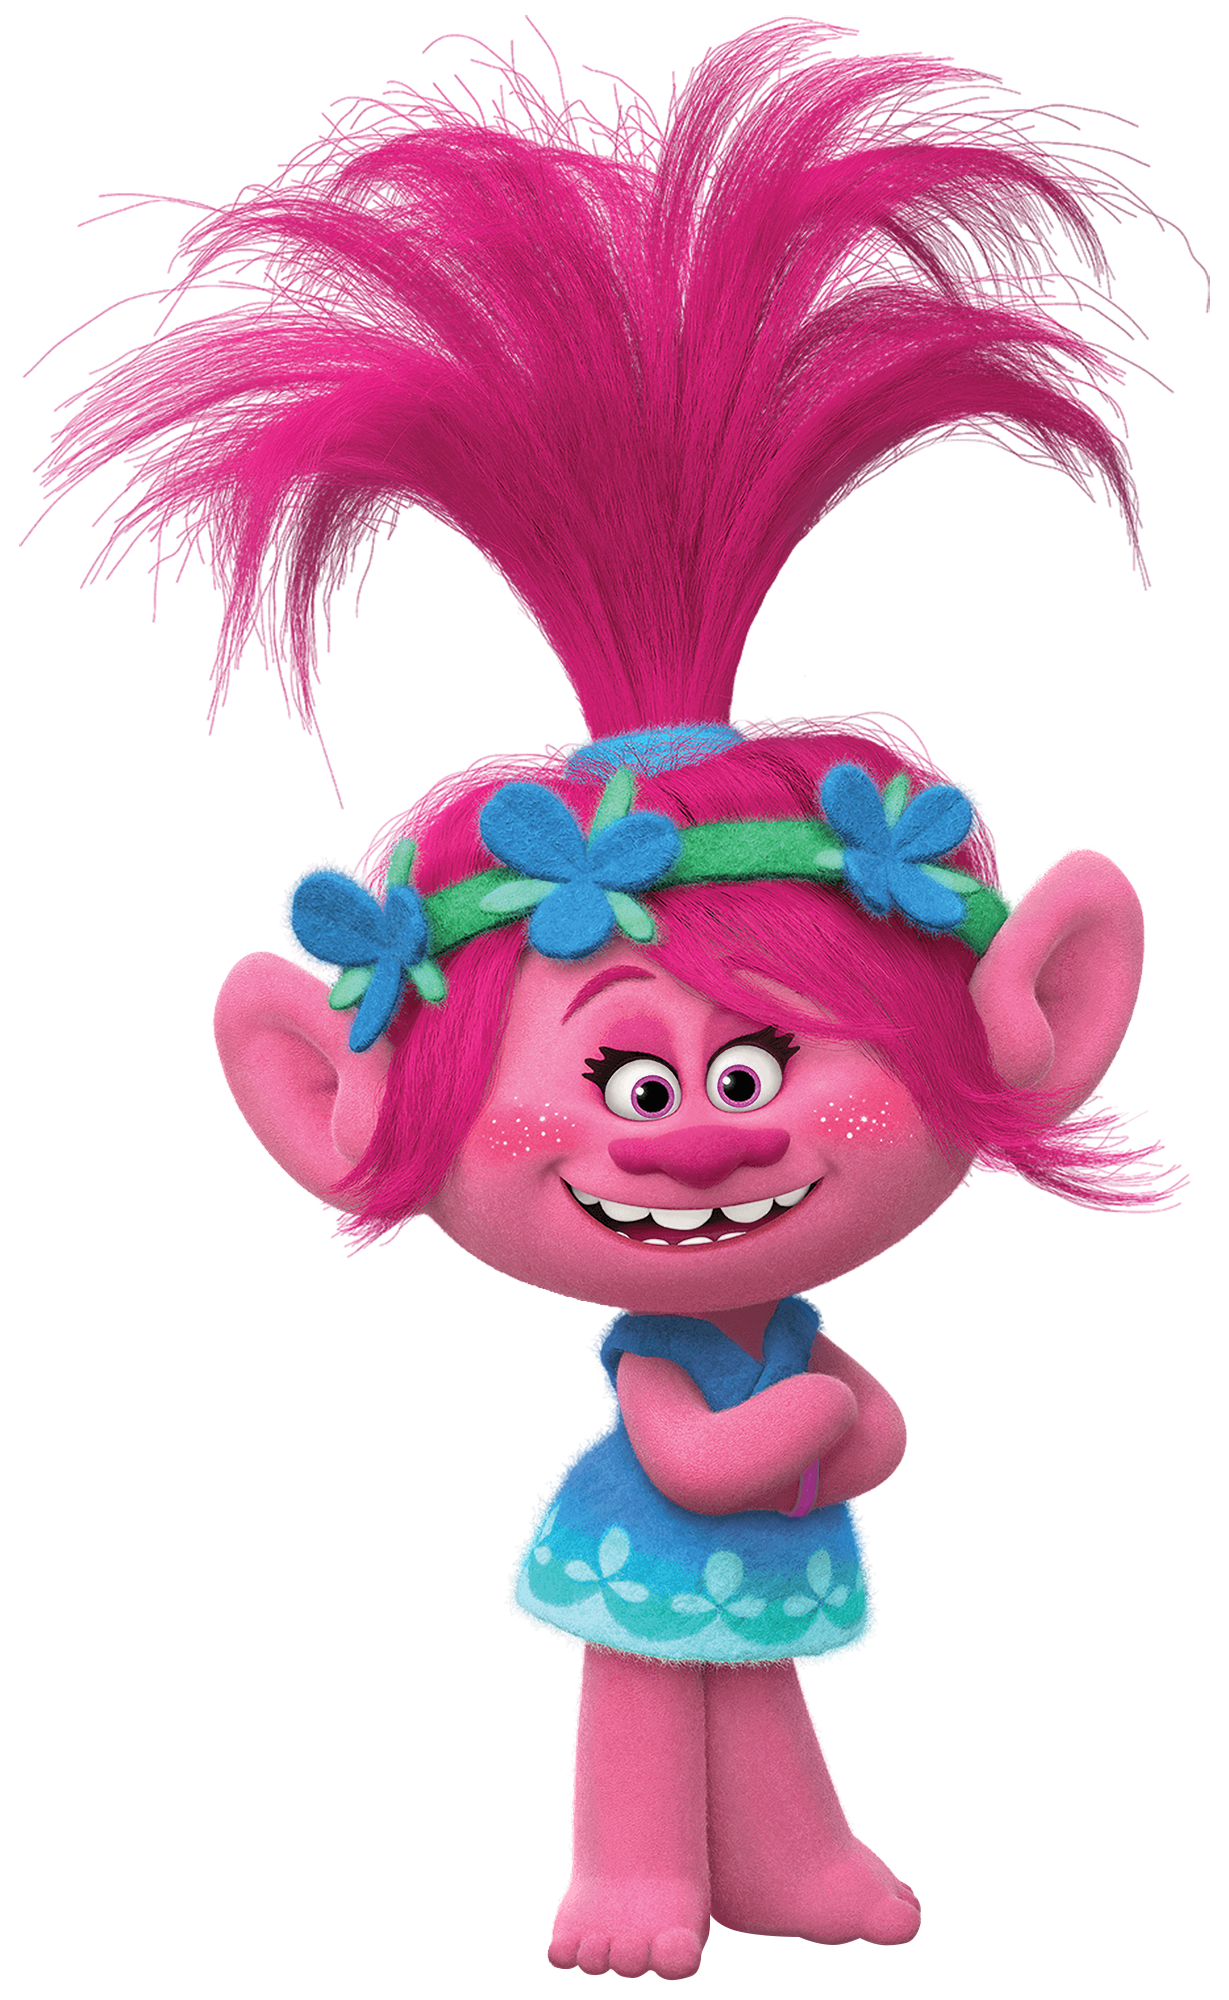 Poppy Trolls World Tour Transparent PNG Image​-Quality Image and Transparent PNG Free Clipart